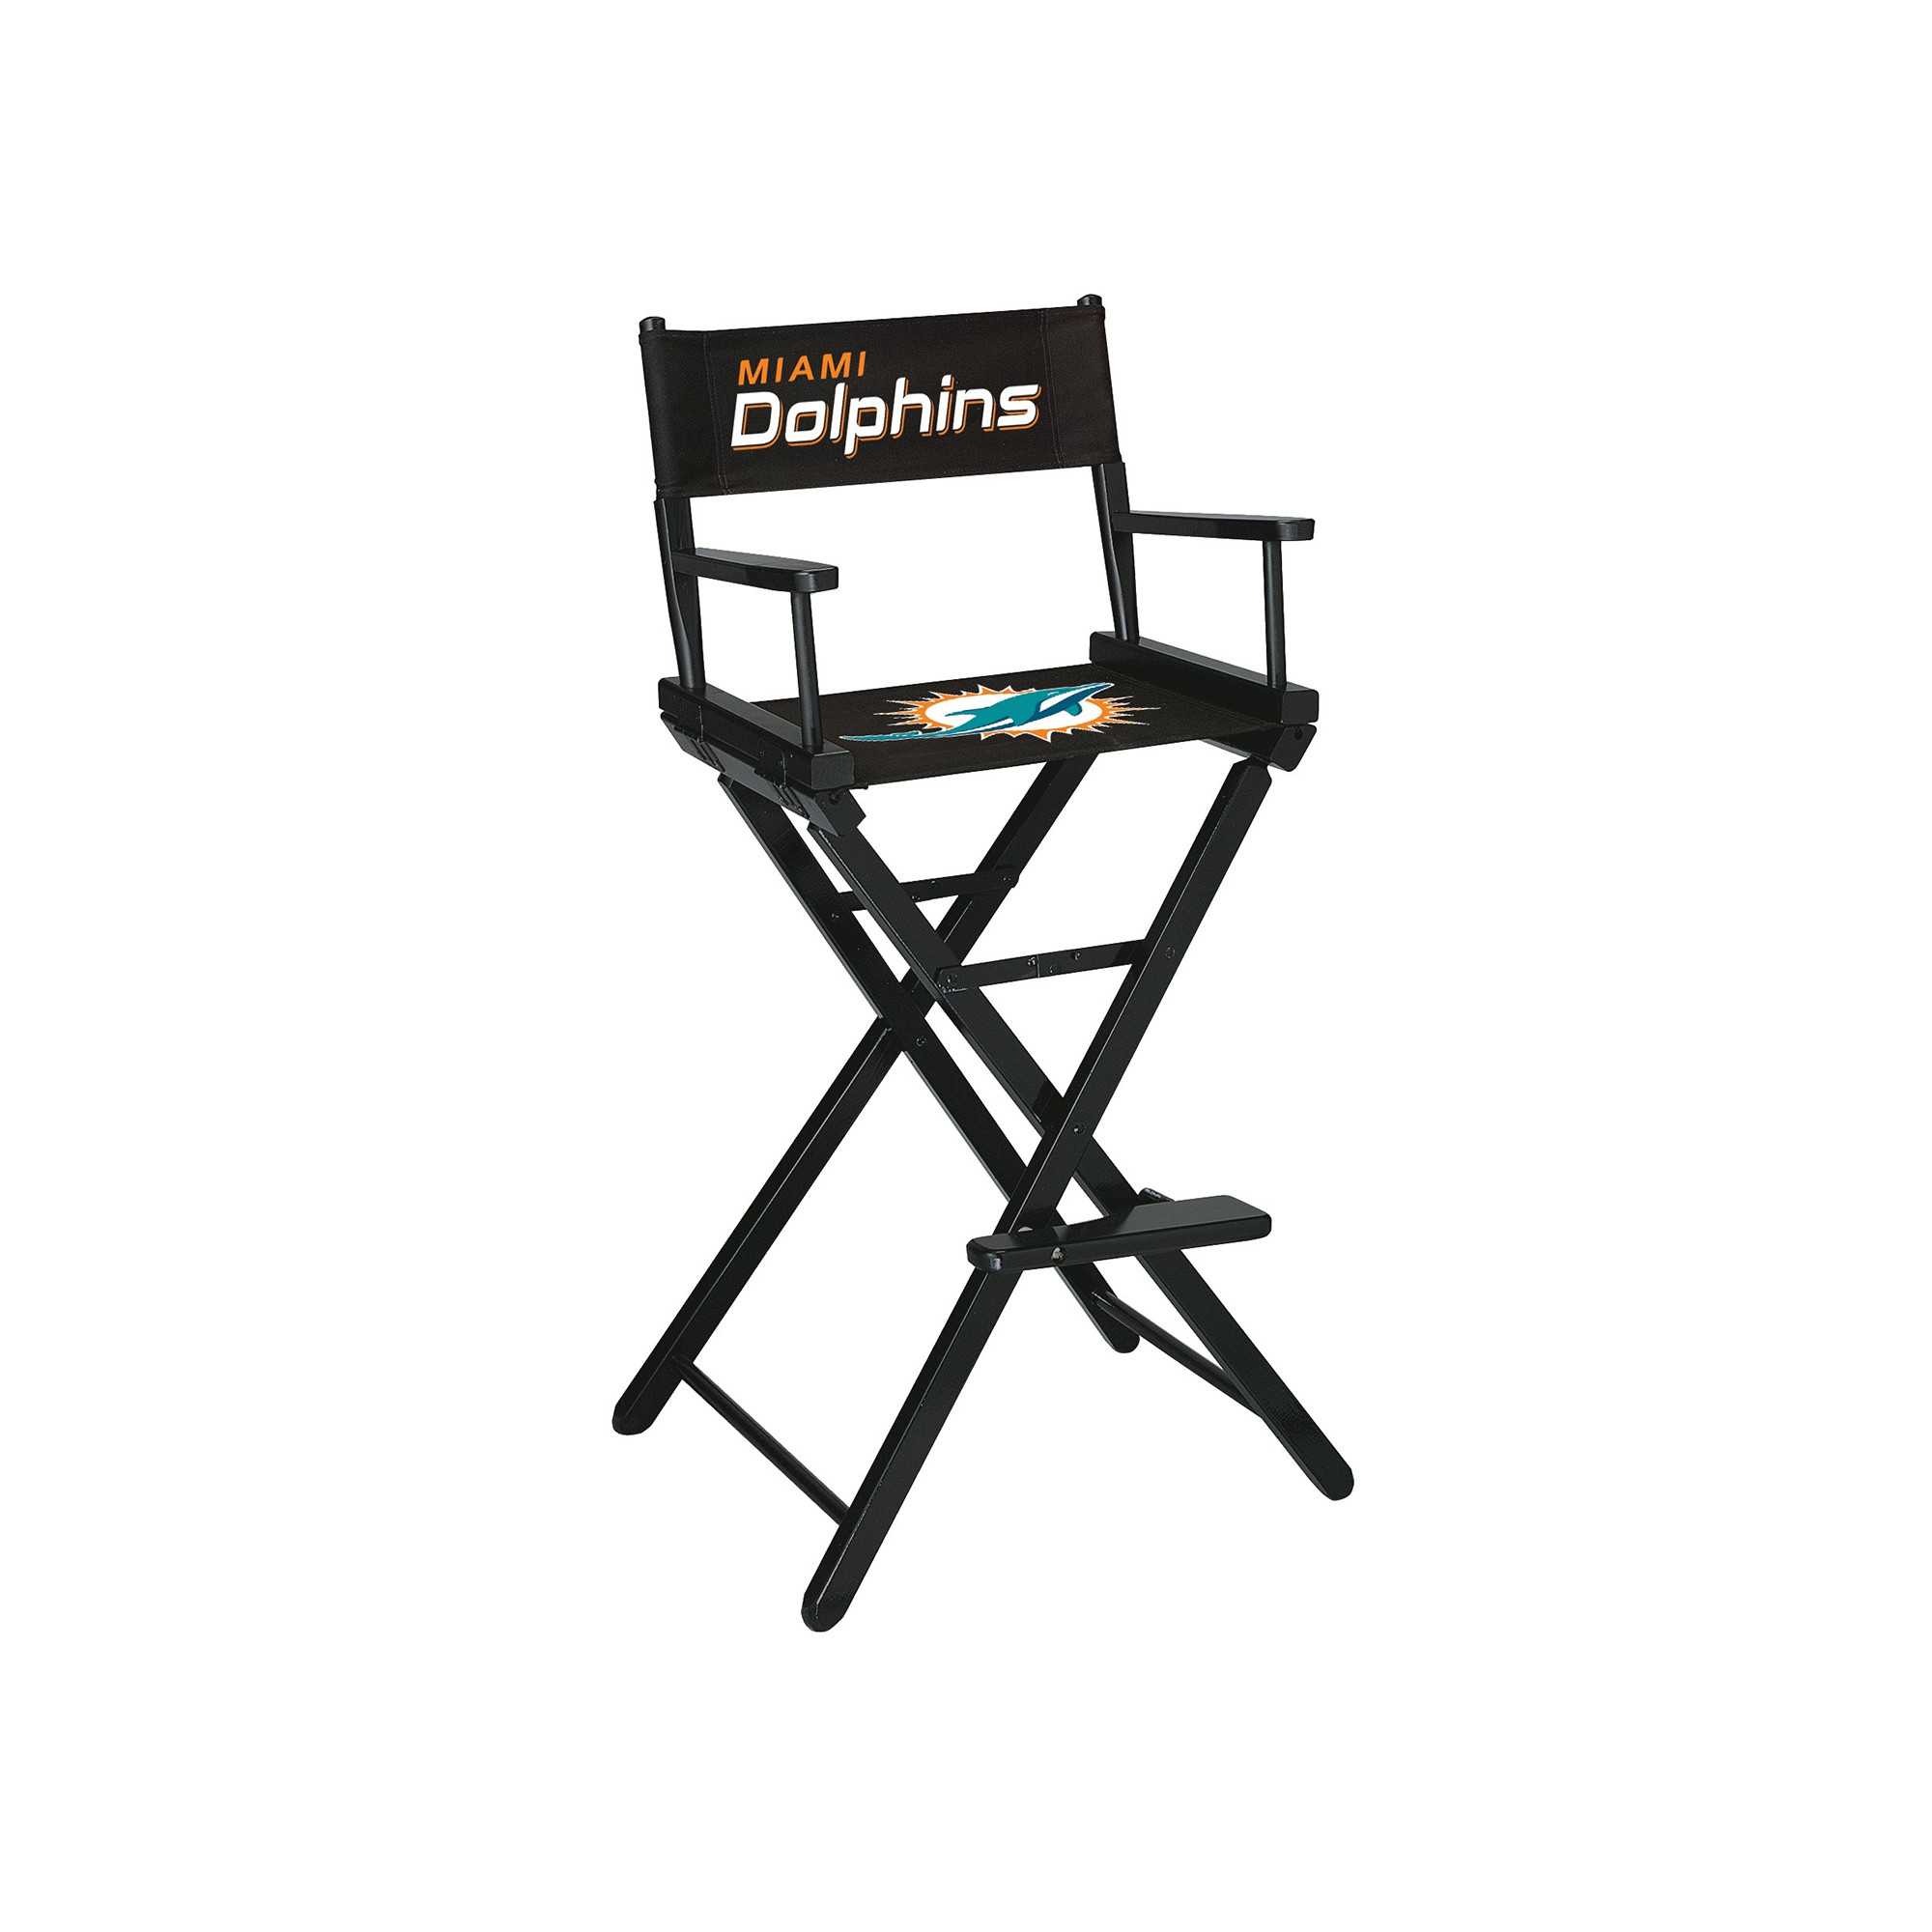 MIAMI DOLPHINS BAR HEIGHT DIRECTORS CHAIR